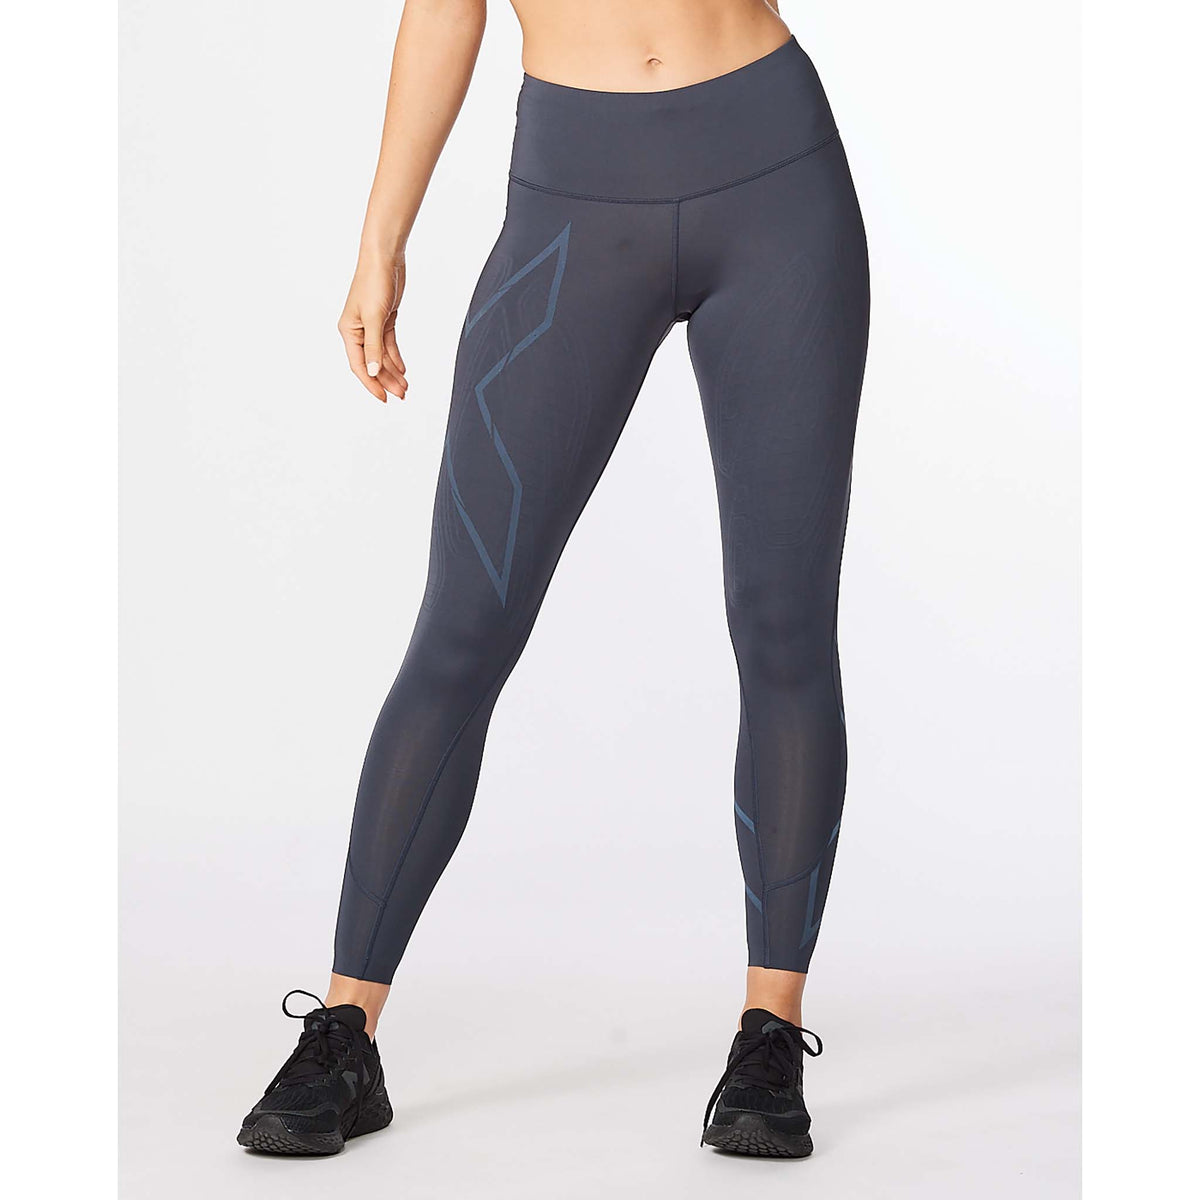 2XU Light Speed Mid-Rise Compression Tights for women – Soccer Sport Fitness